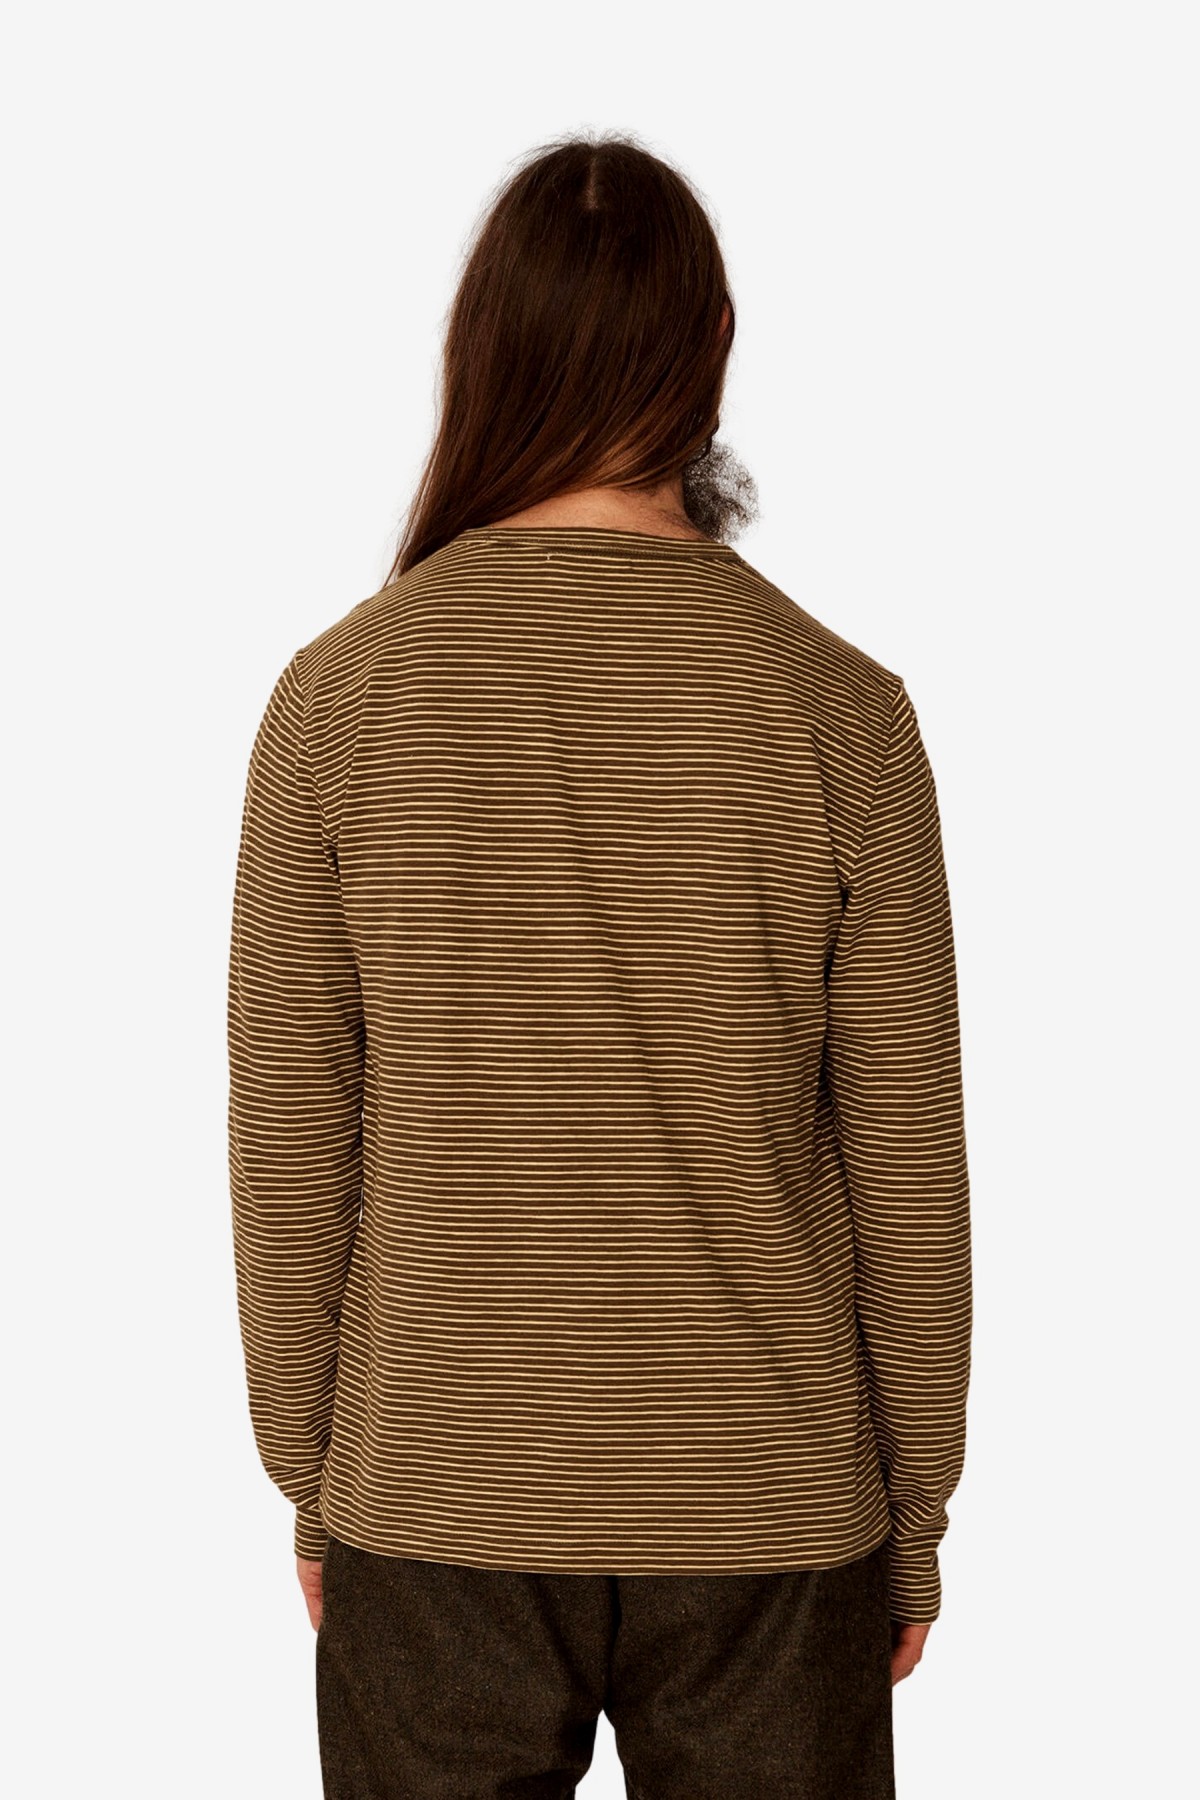 YMC You Must Create Thurston Long Sleeve T-Shirt in Olive Camel